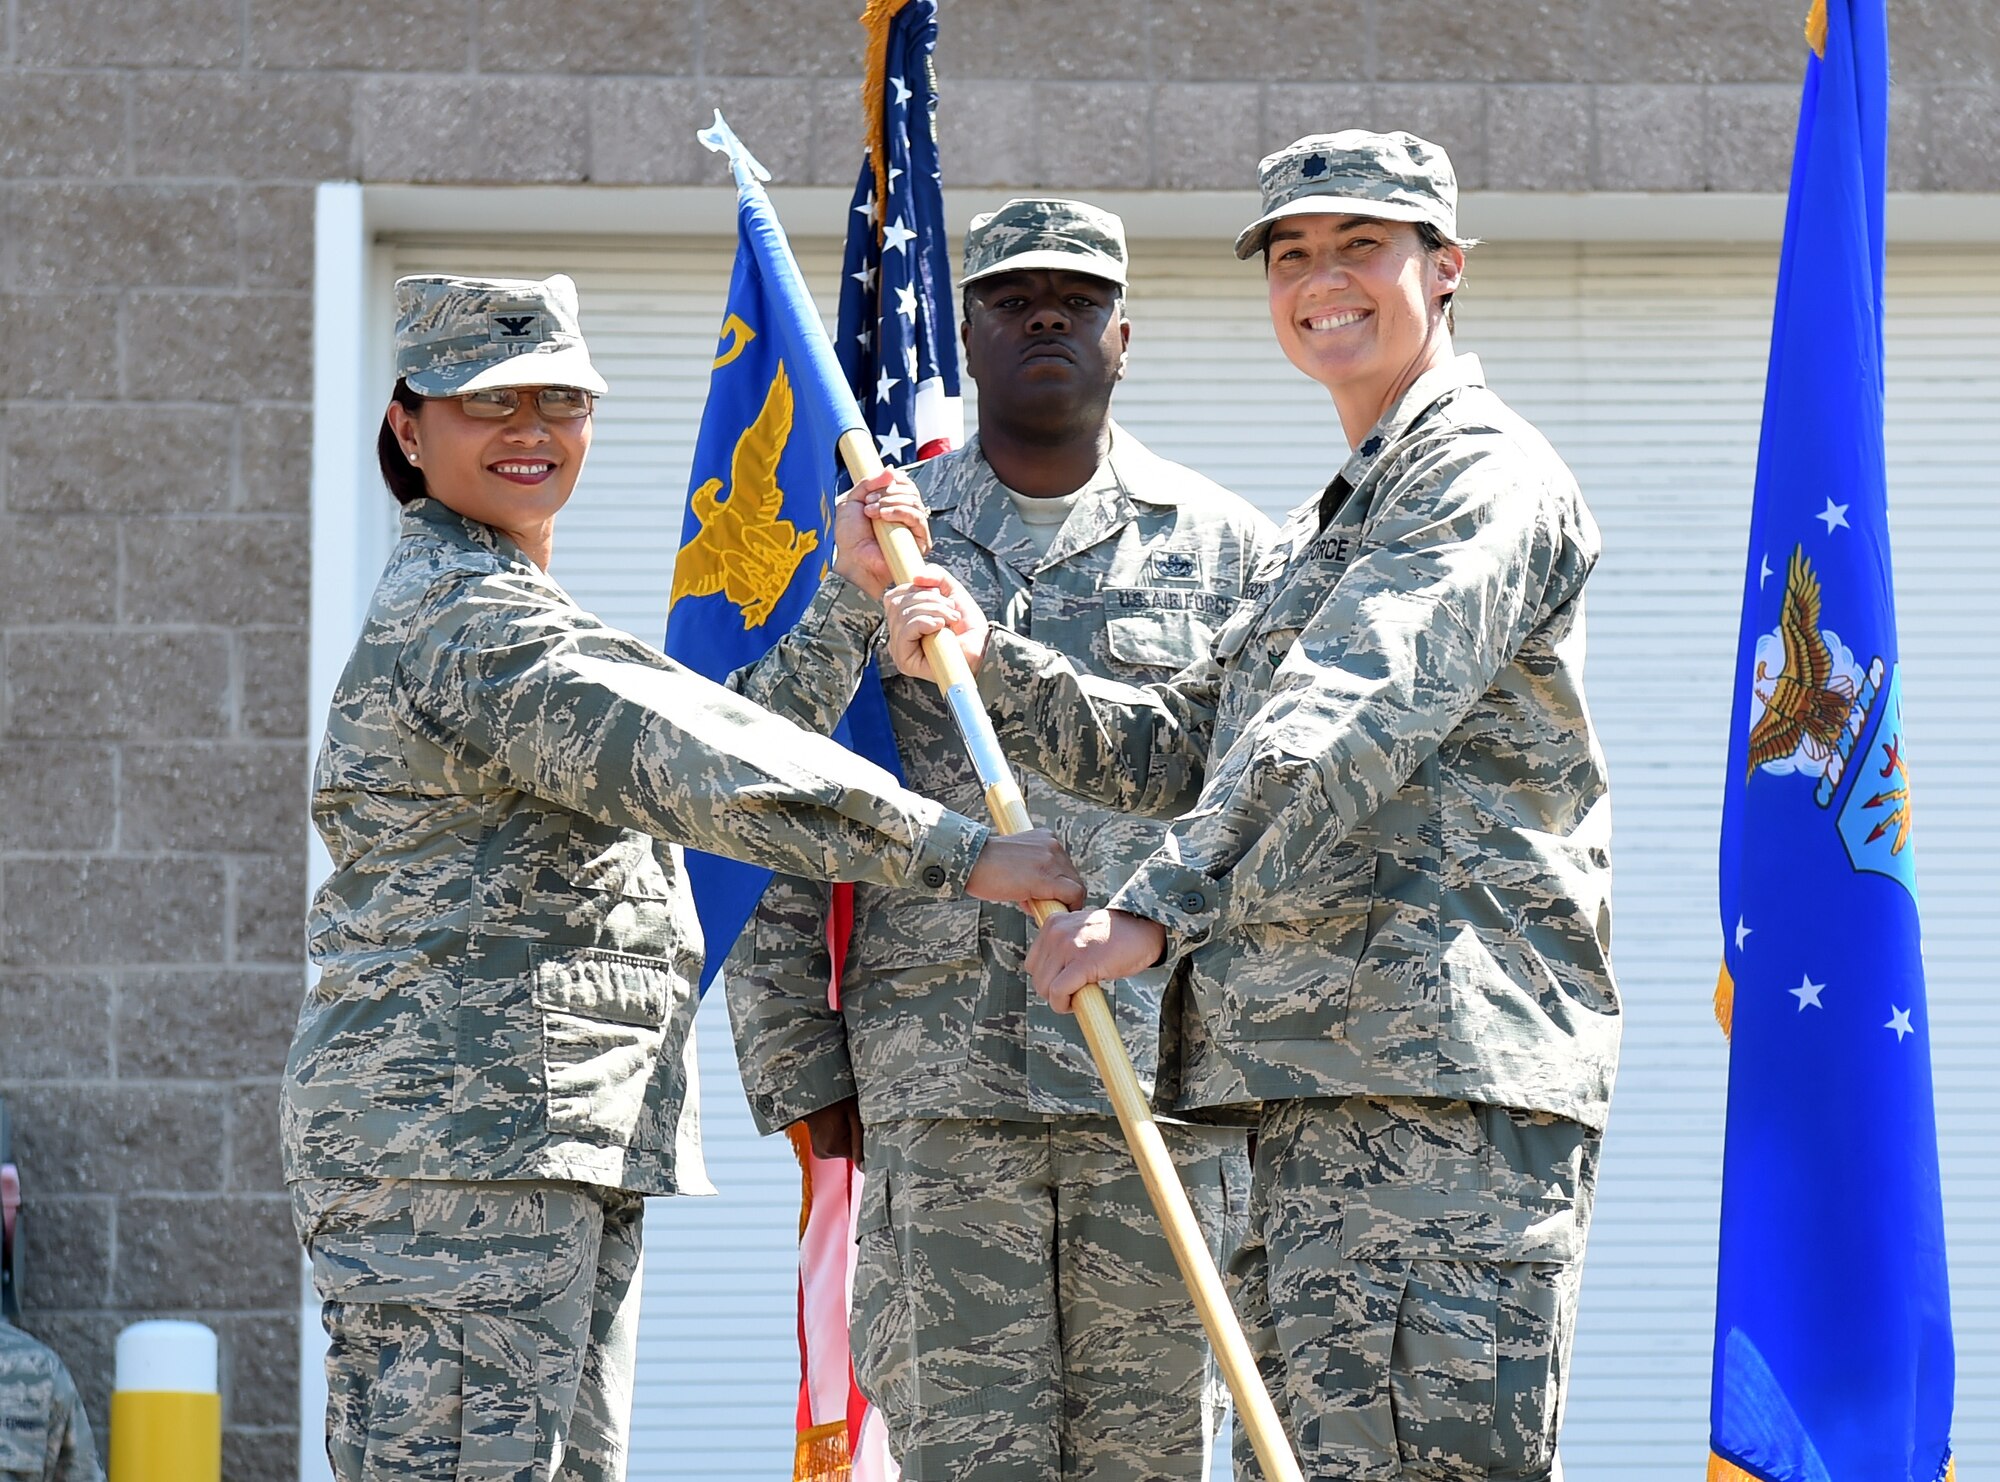 Col. Rose Jourdan, 460th Mission Support Group commander, left; presents the 460th Space Wing guidon to Lt. Col. Cynthia Clefisch, right; symbolizing her assumption of command as the 460th Civil Engineer Squadron commander June 30, 2015, on Buckley Air Force Base, Colo. Clefisch became the commander of the 460th CES after one year of service as the 380th Expeditionary CES, Southwest Asia commander. (U.S. Air Force photo by Airman 1st Class Emily E. Amyotte/Released)